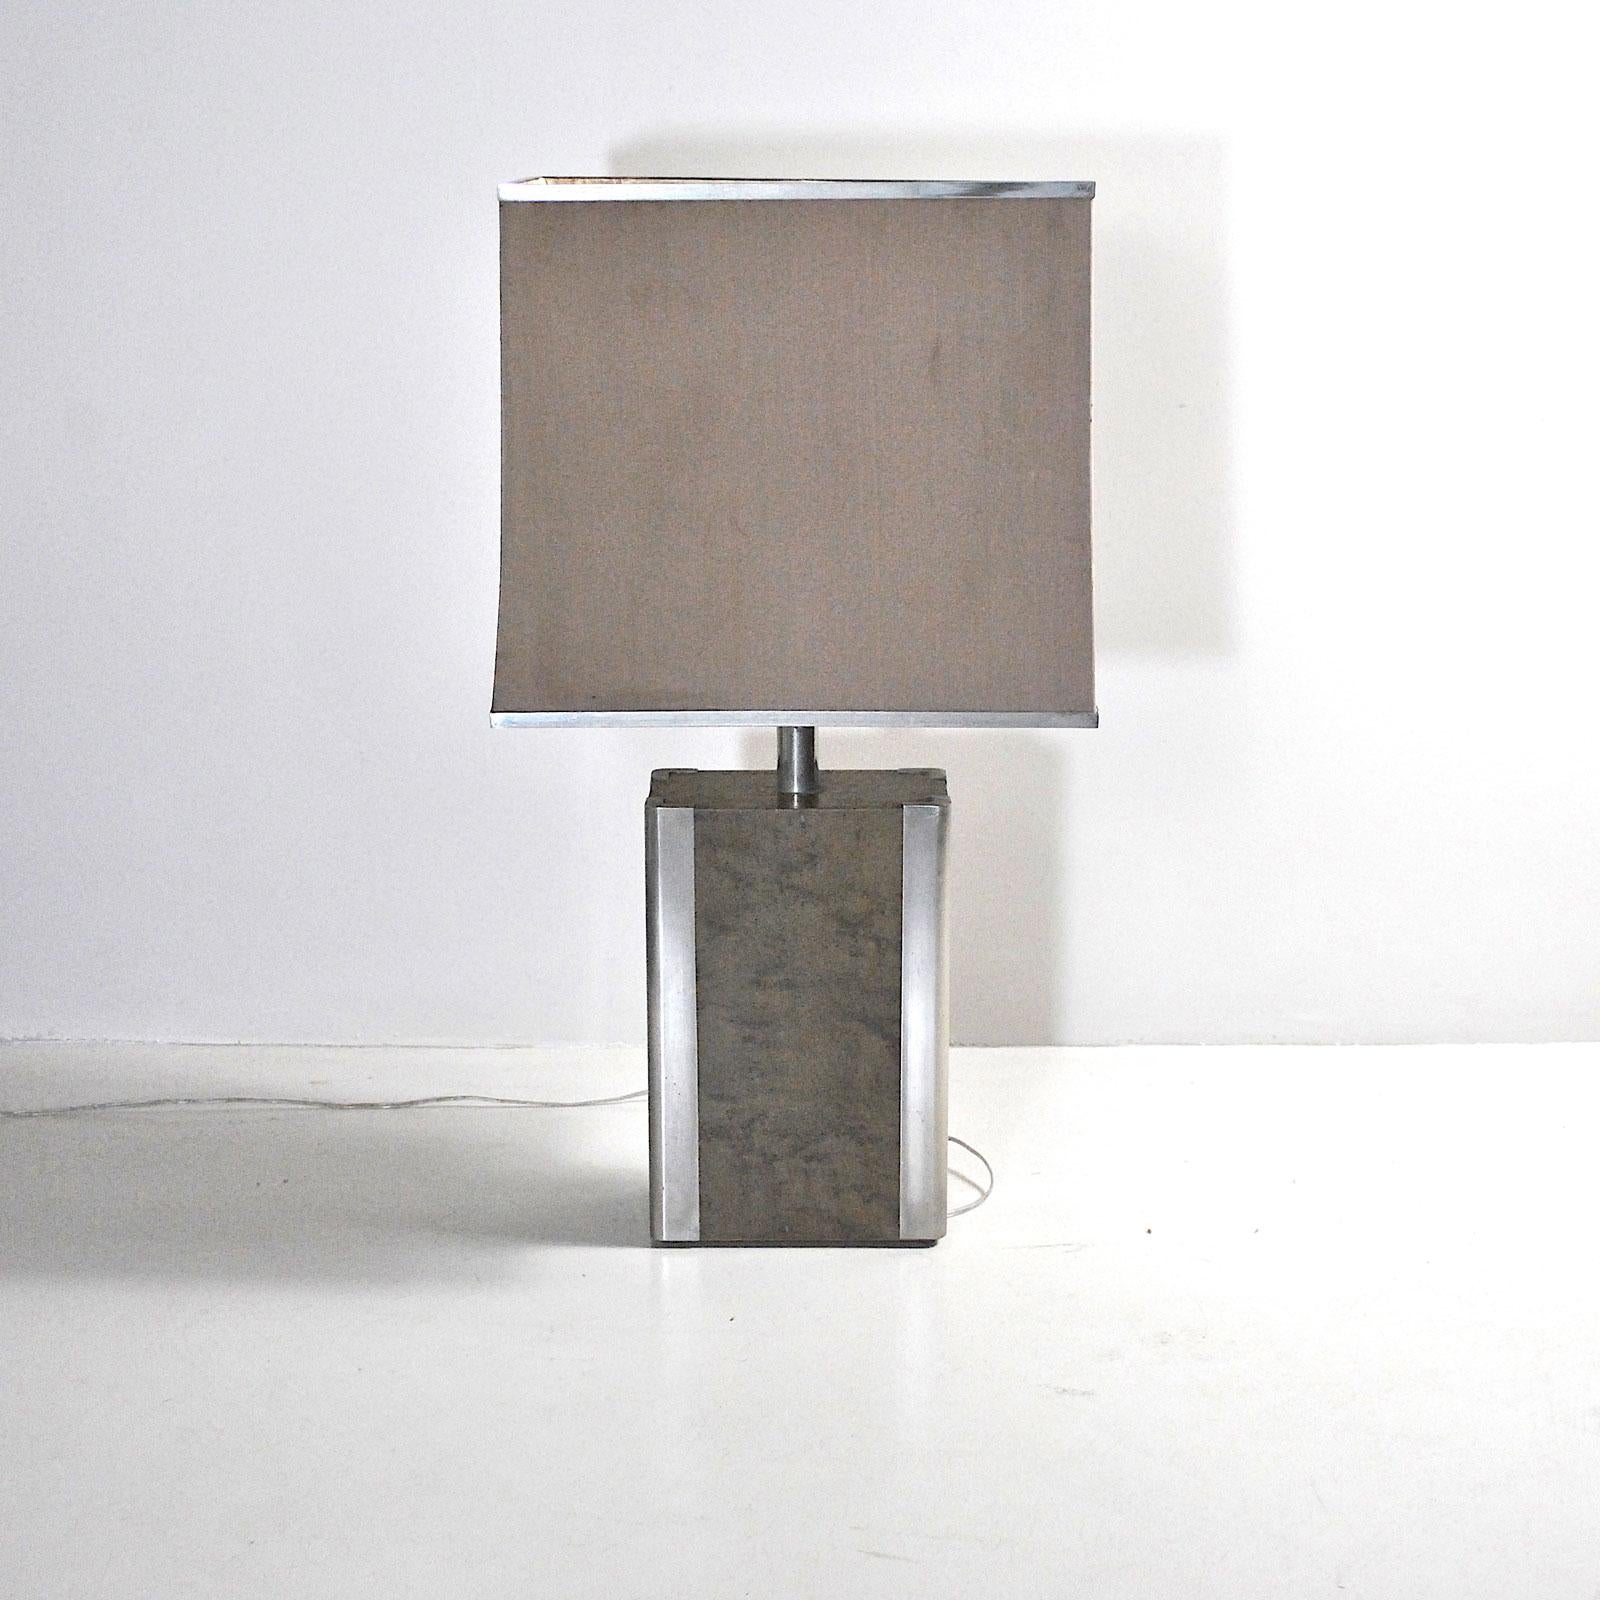 An Italian table lamp in steel an wood from the 1970s.


The lamp has no defects but only its patina, it is sold together with the original lampshade which shows significant signs of wear. We are able to create lampshades of any shape, size and